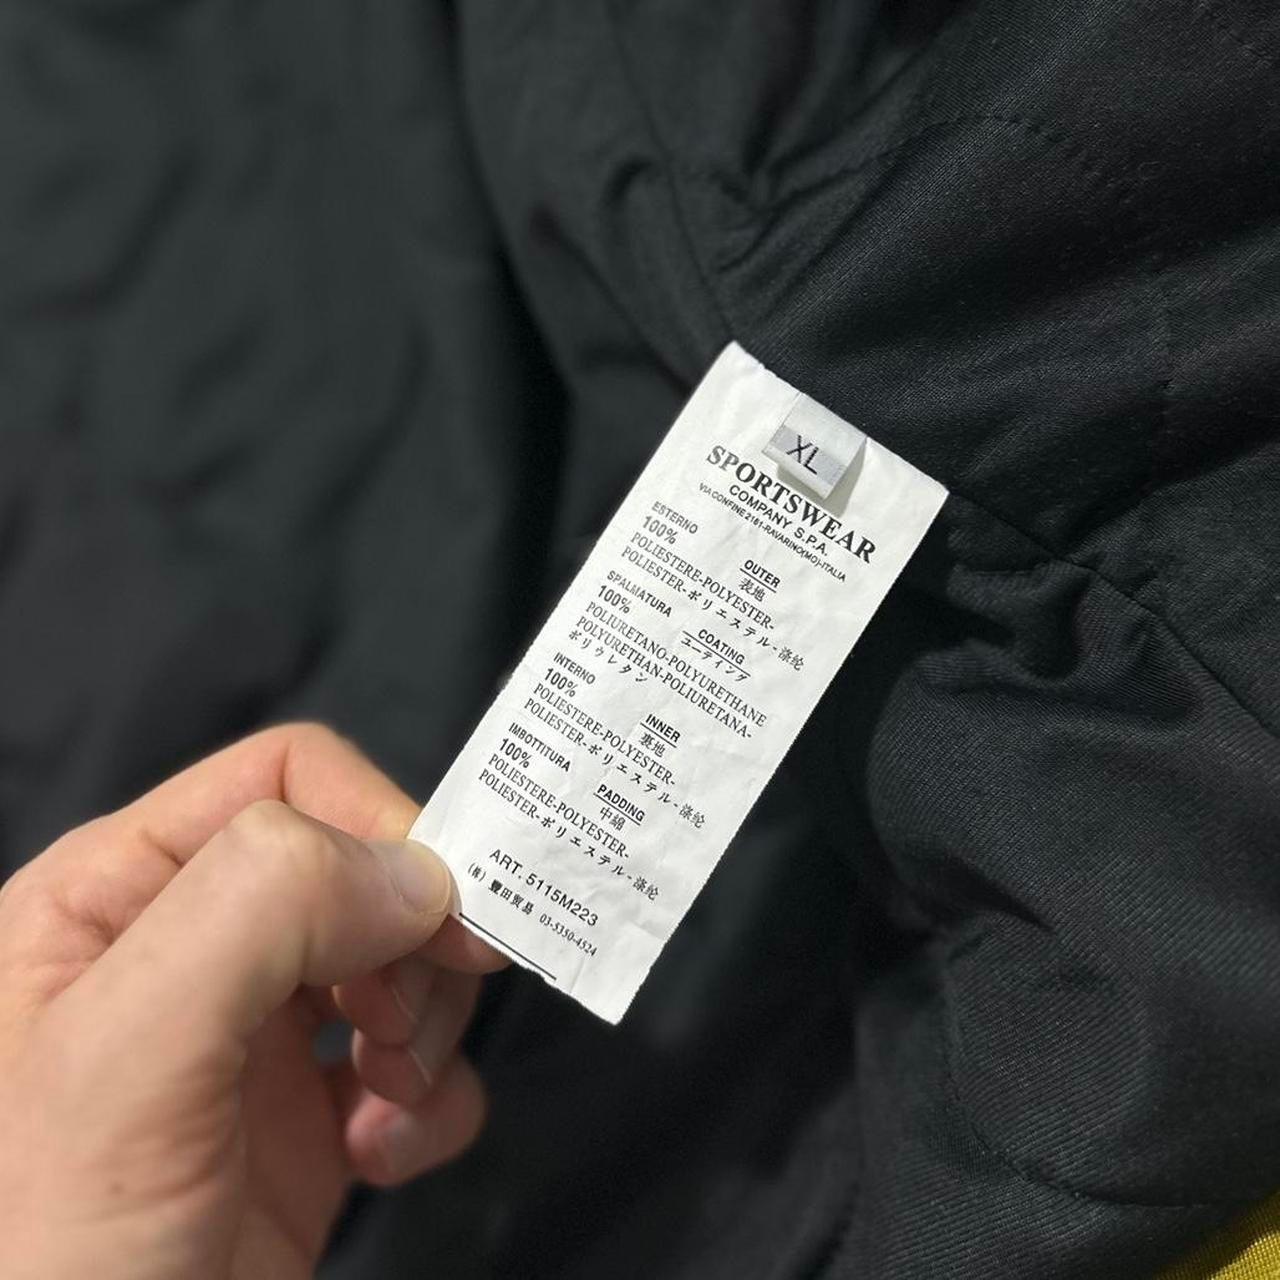 Stone Island Yellow Padded Down Jacket - Known Source